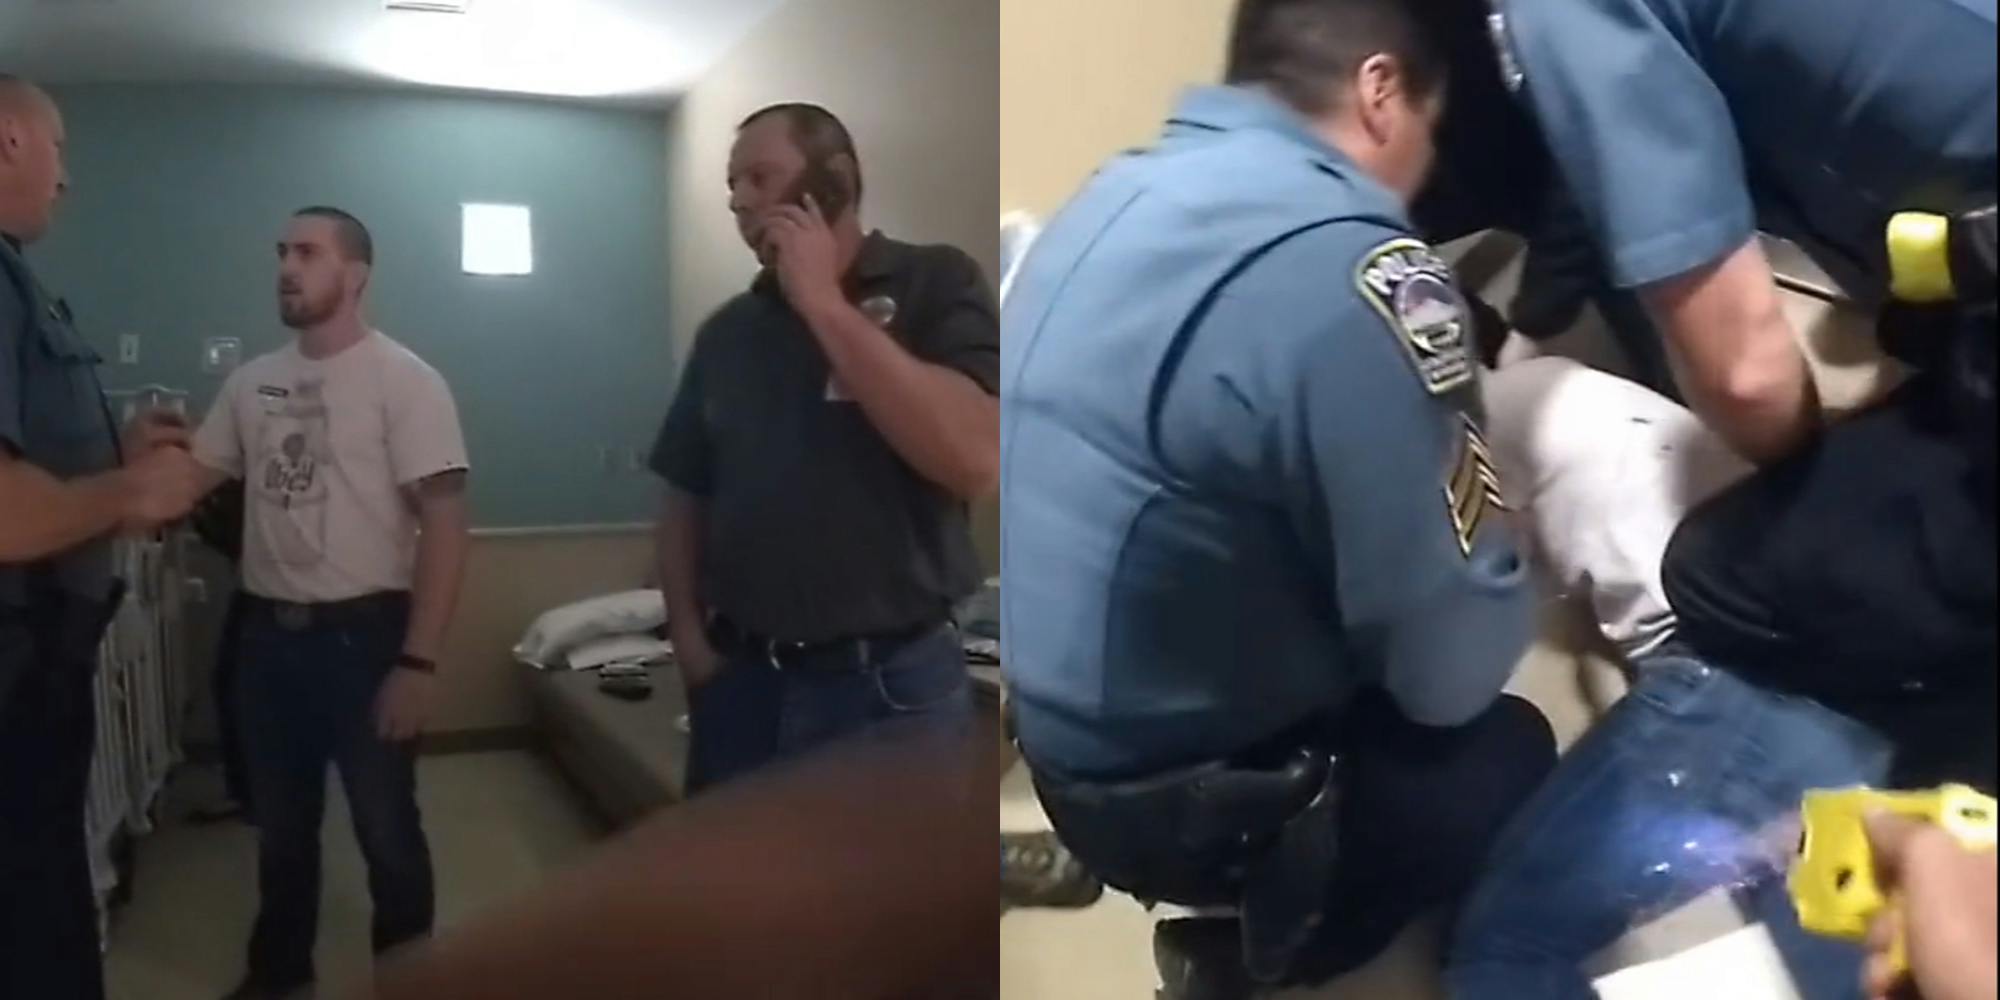 police confront man in hospital room (l) police restrain and taze man on floor (r)